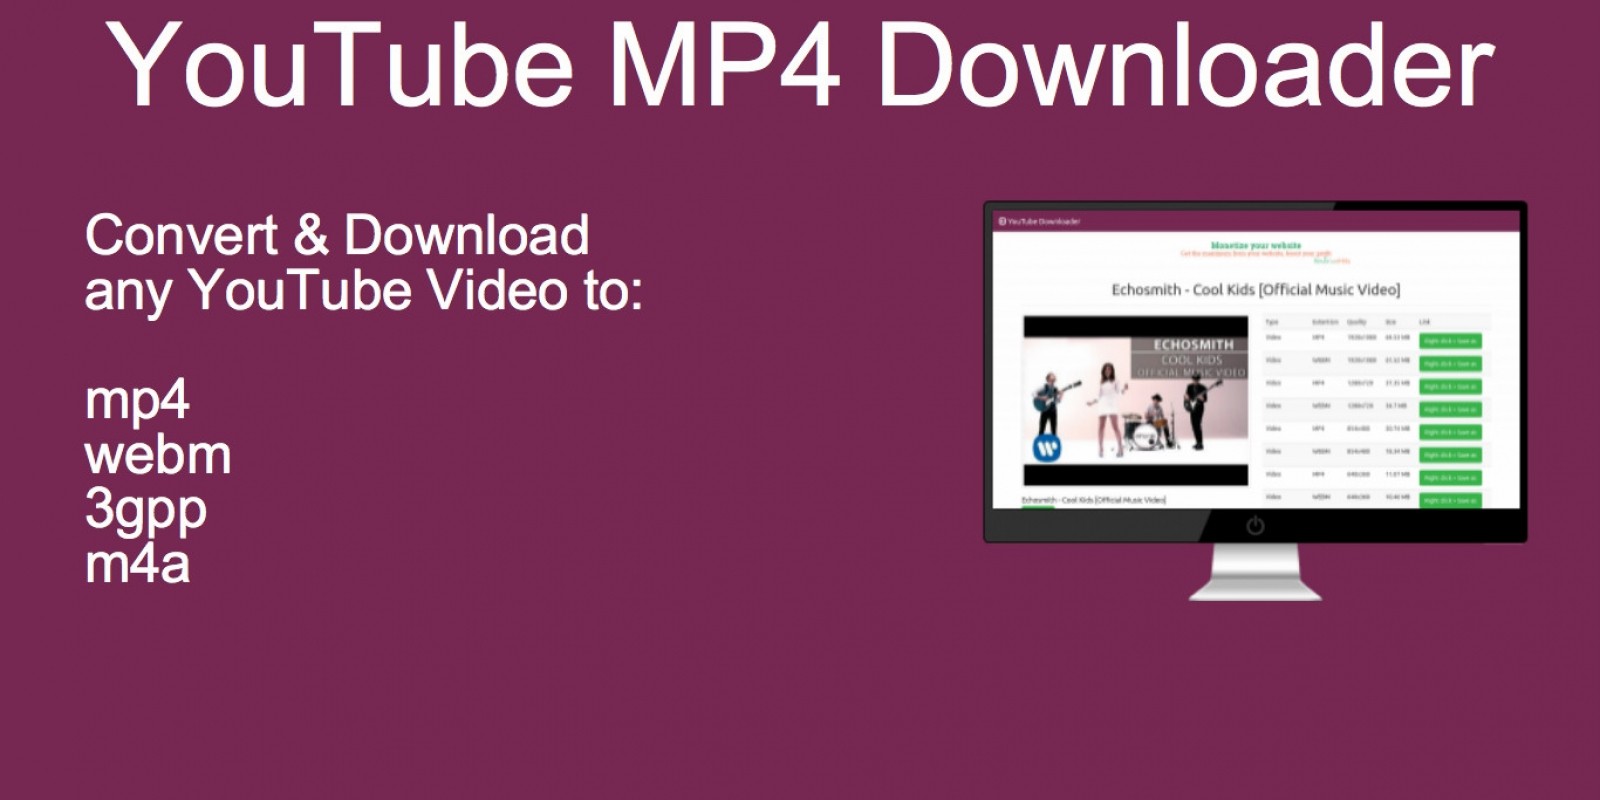 any mp4 video download